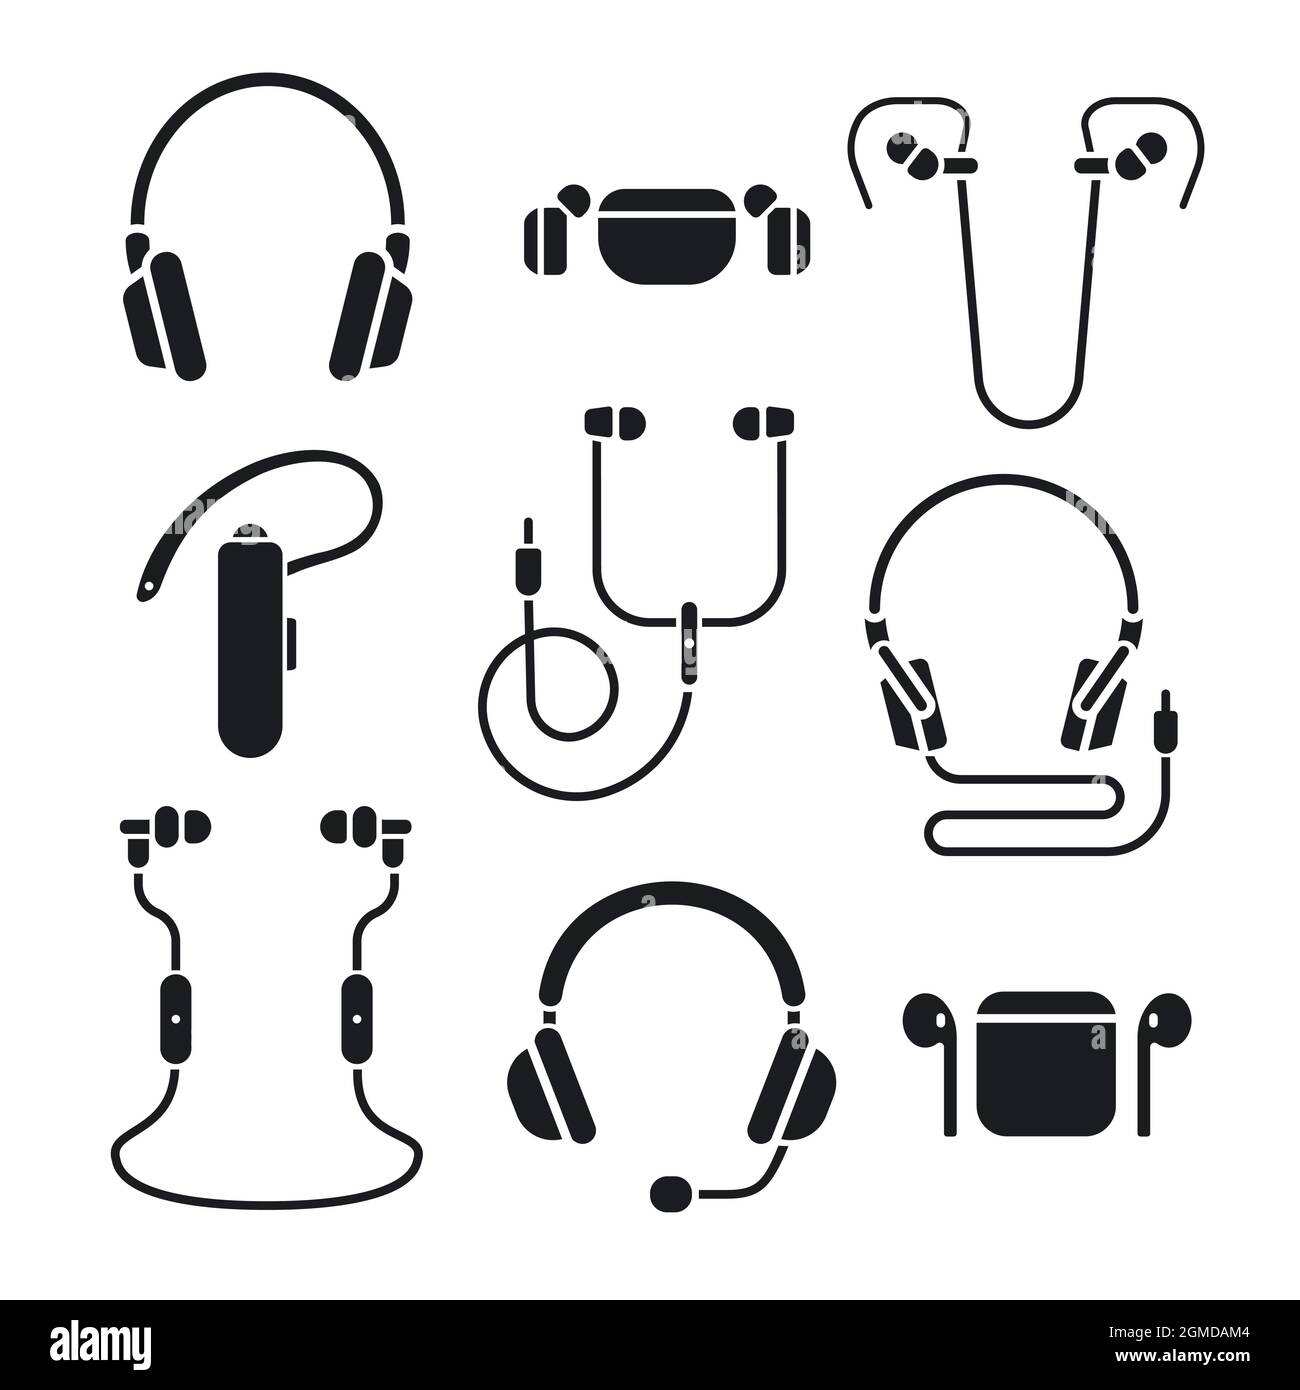 Illustration icon set of the black and white different kind of earphones gadgets Stock Vector